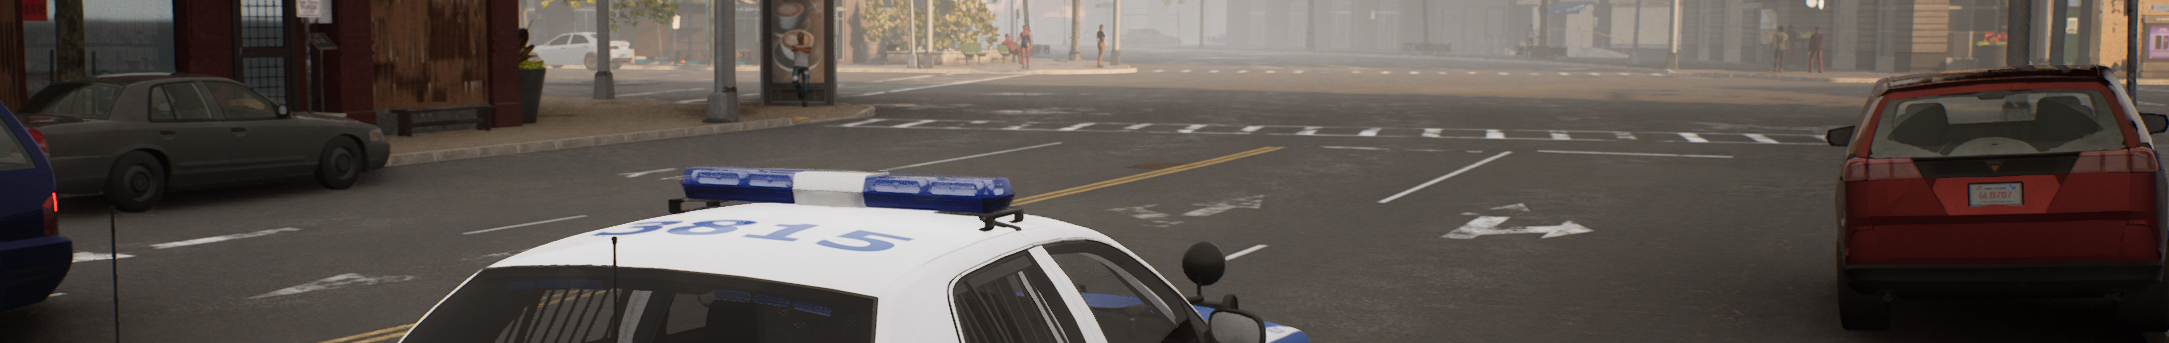 Police Simulator: Patrol Officers - How To Fix Parking Issues Guide - Incorrect Positoning